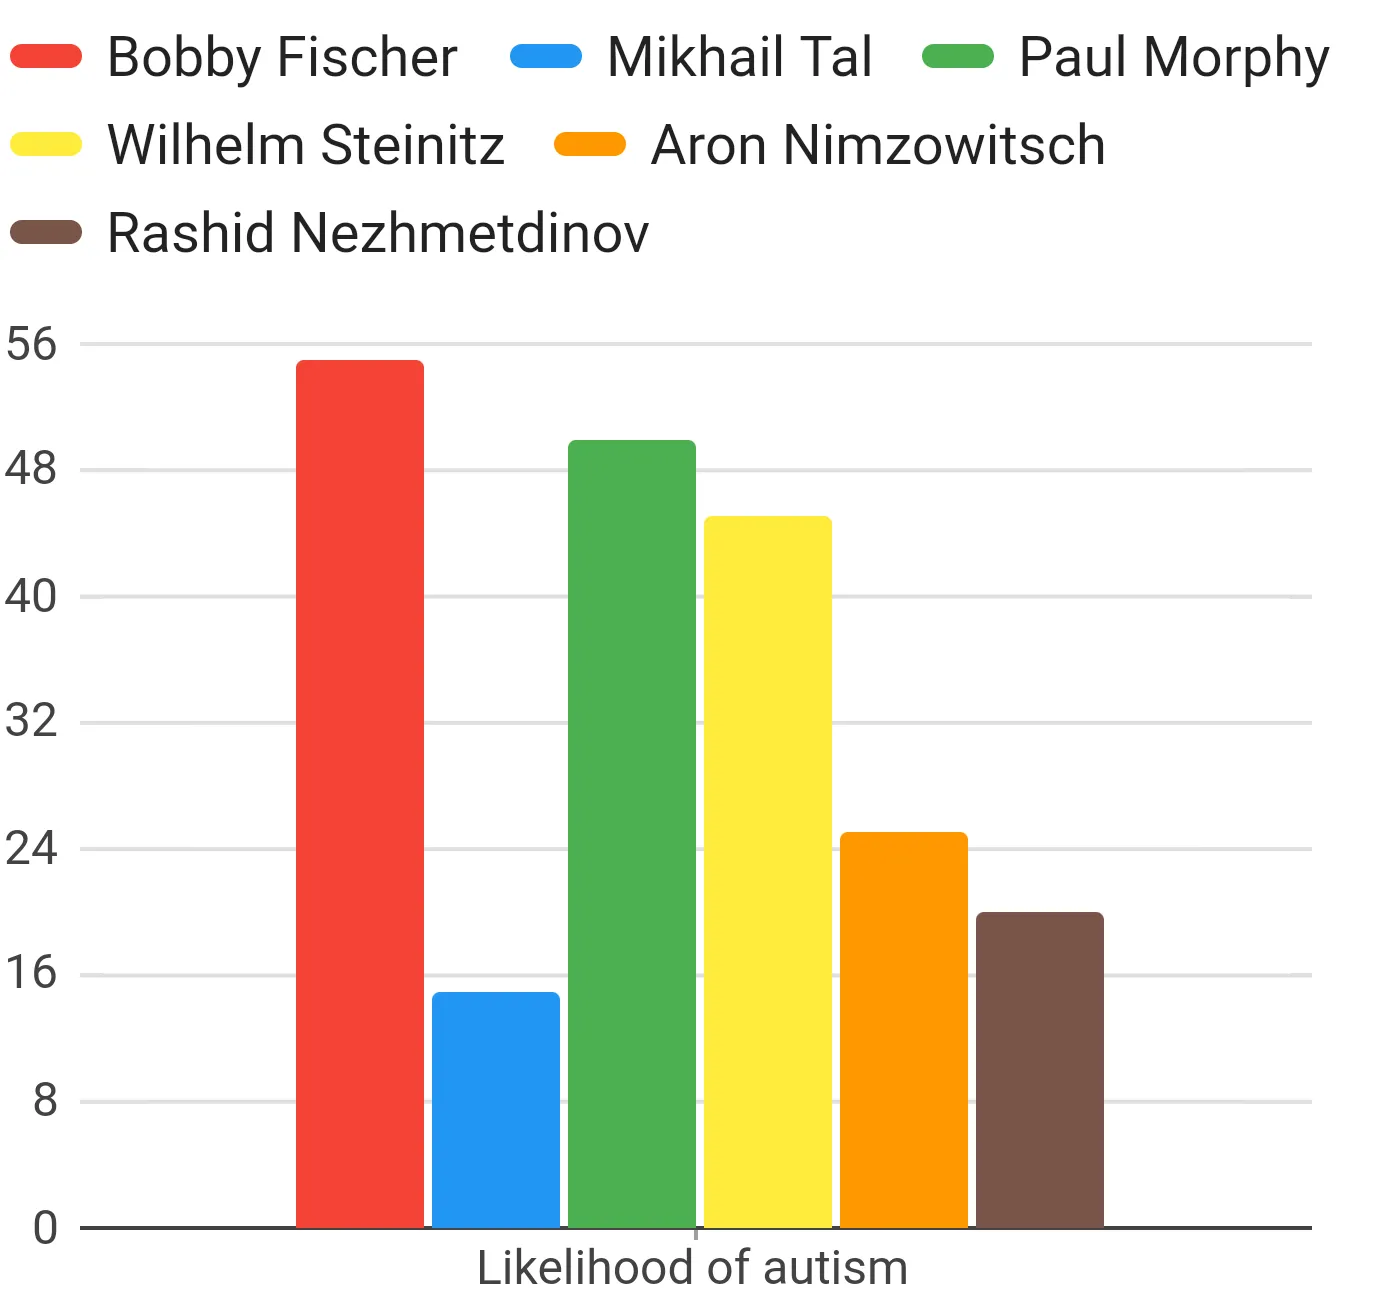 This chart list historic chess players who are likely to be autistic, and how likely they are to be autistic when compared to one another. 